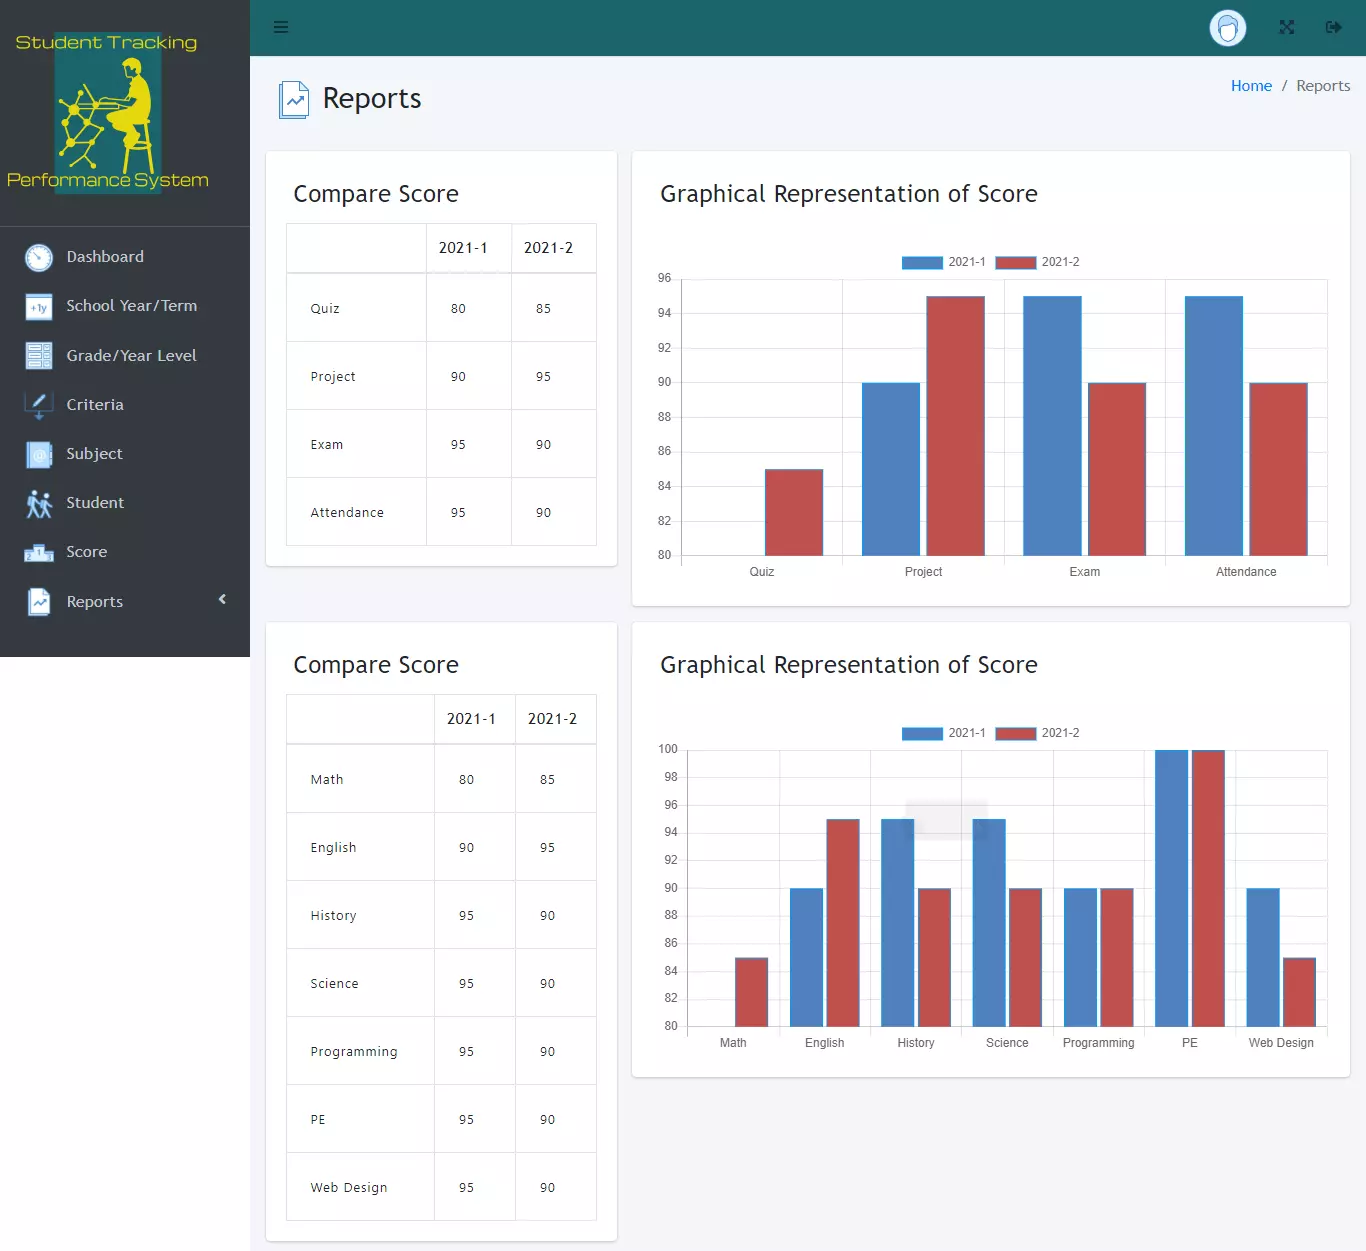 Student Academic Performance Tracking and Monitoring System - Compare Score Report